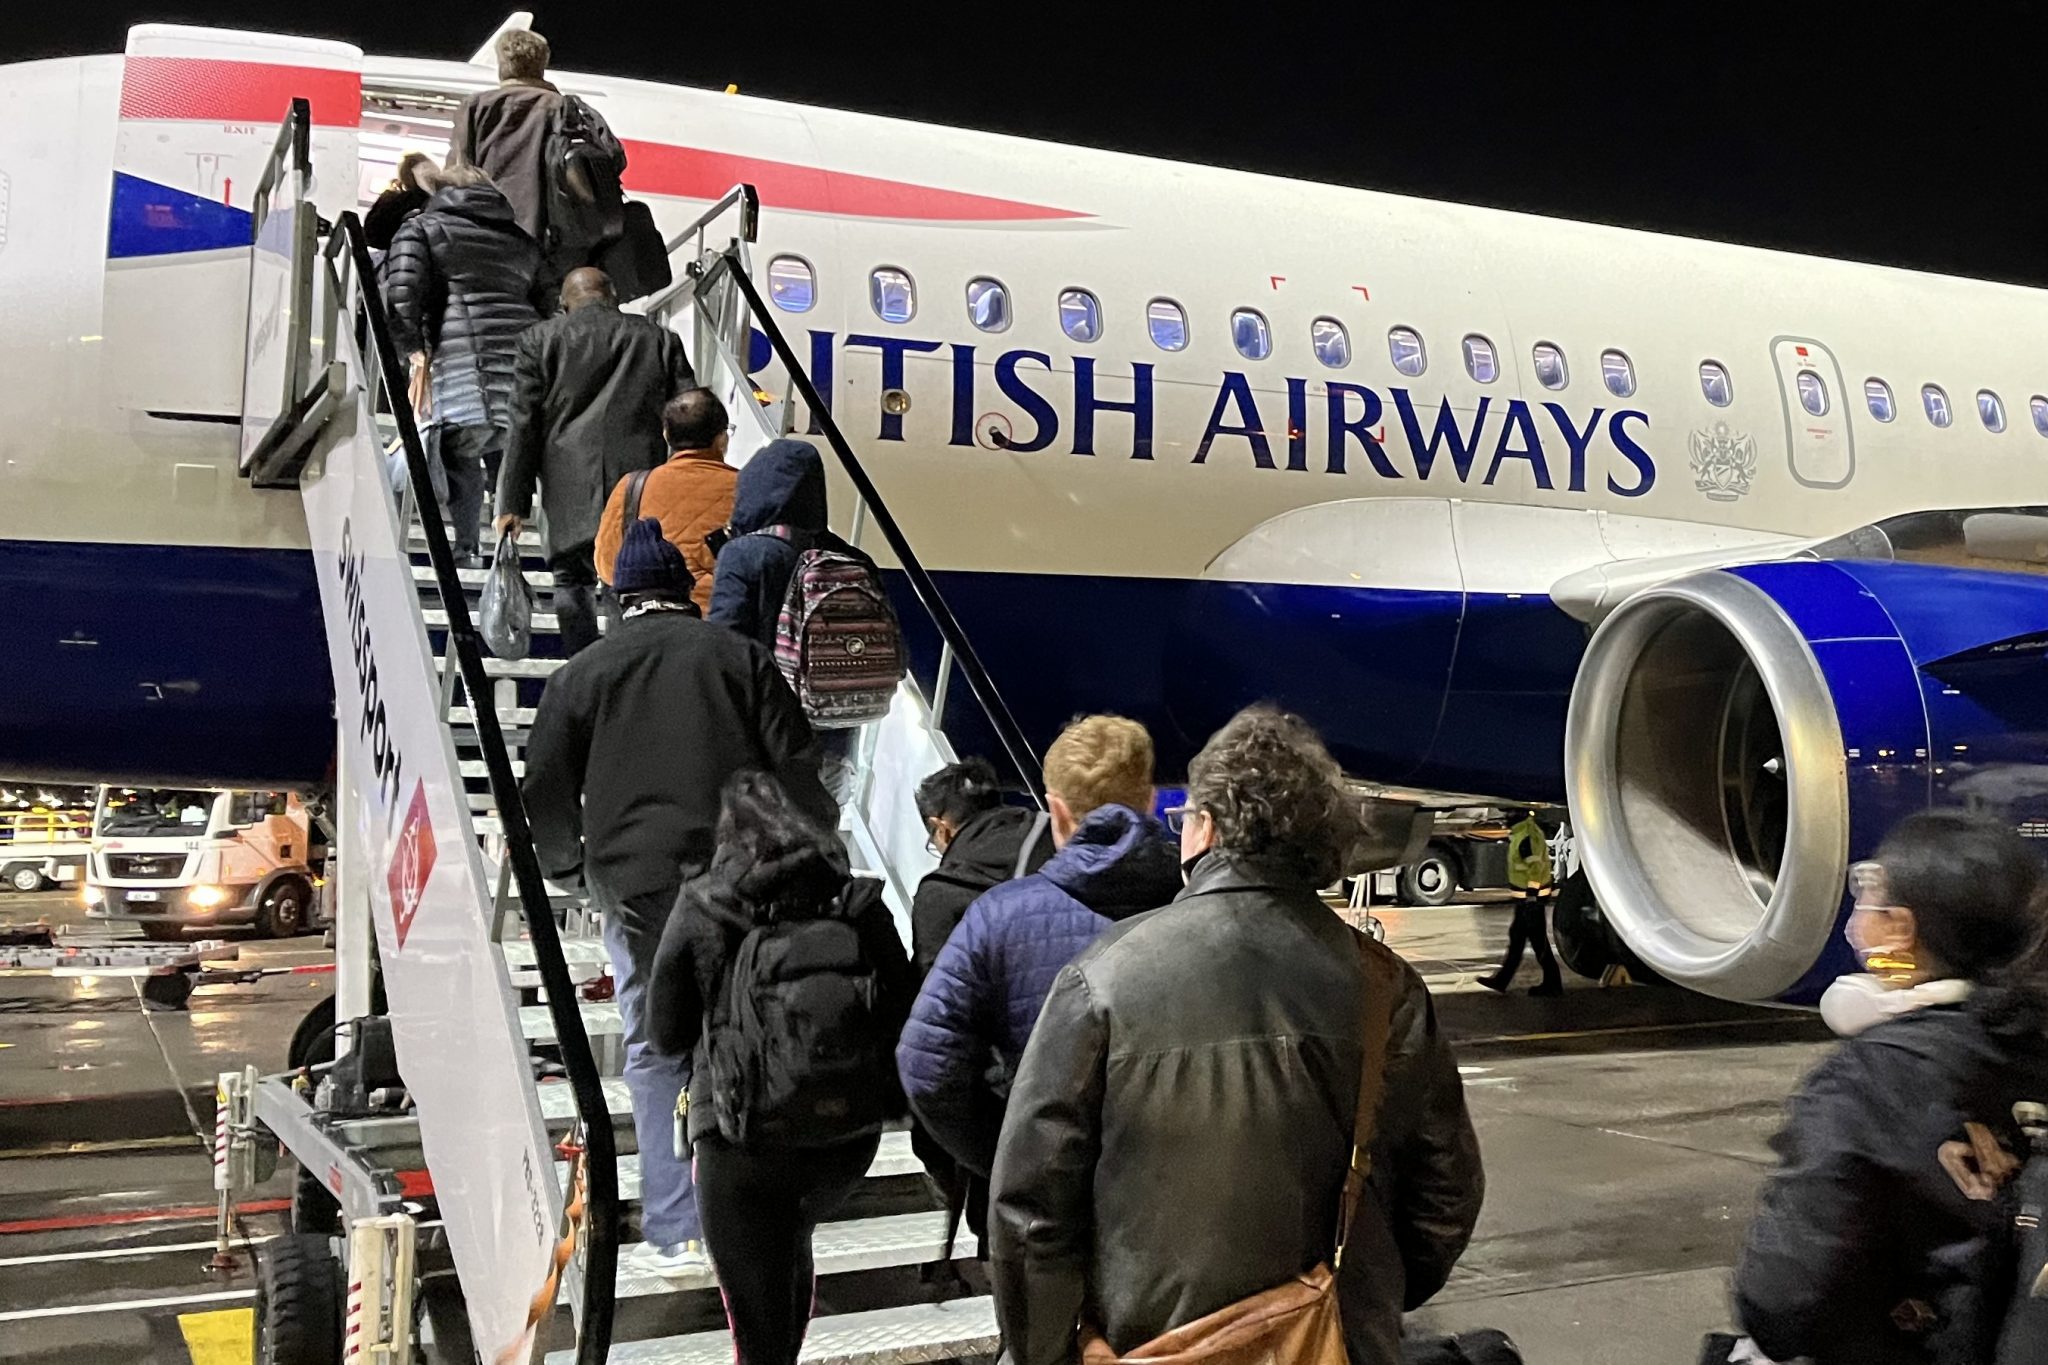 Pictured, Passengers boarding British Airways plane by stairs at Dublin’s airport.  Business travel is fairly strong in South America. Source: Skift